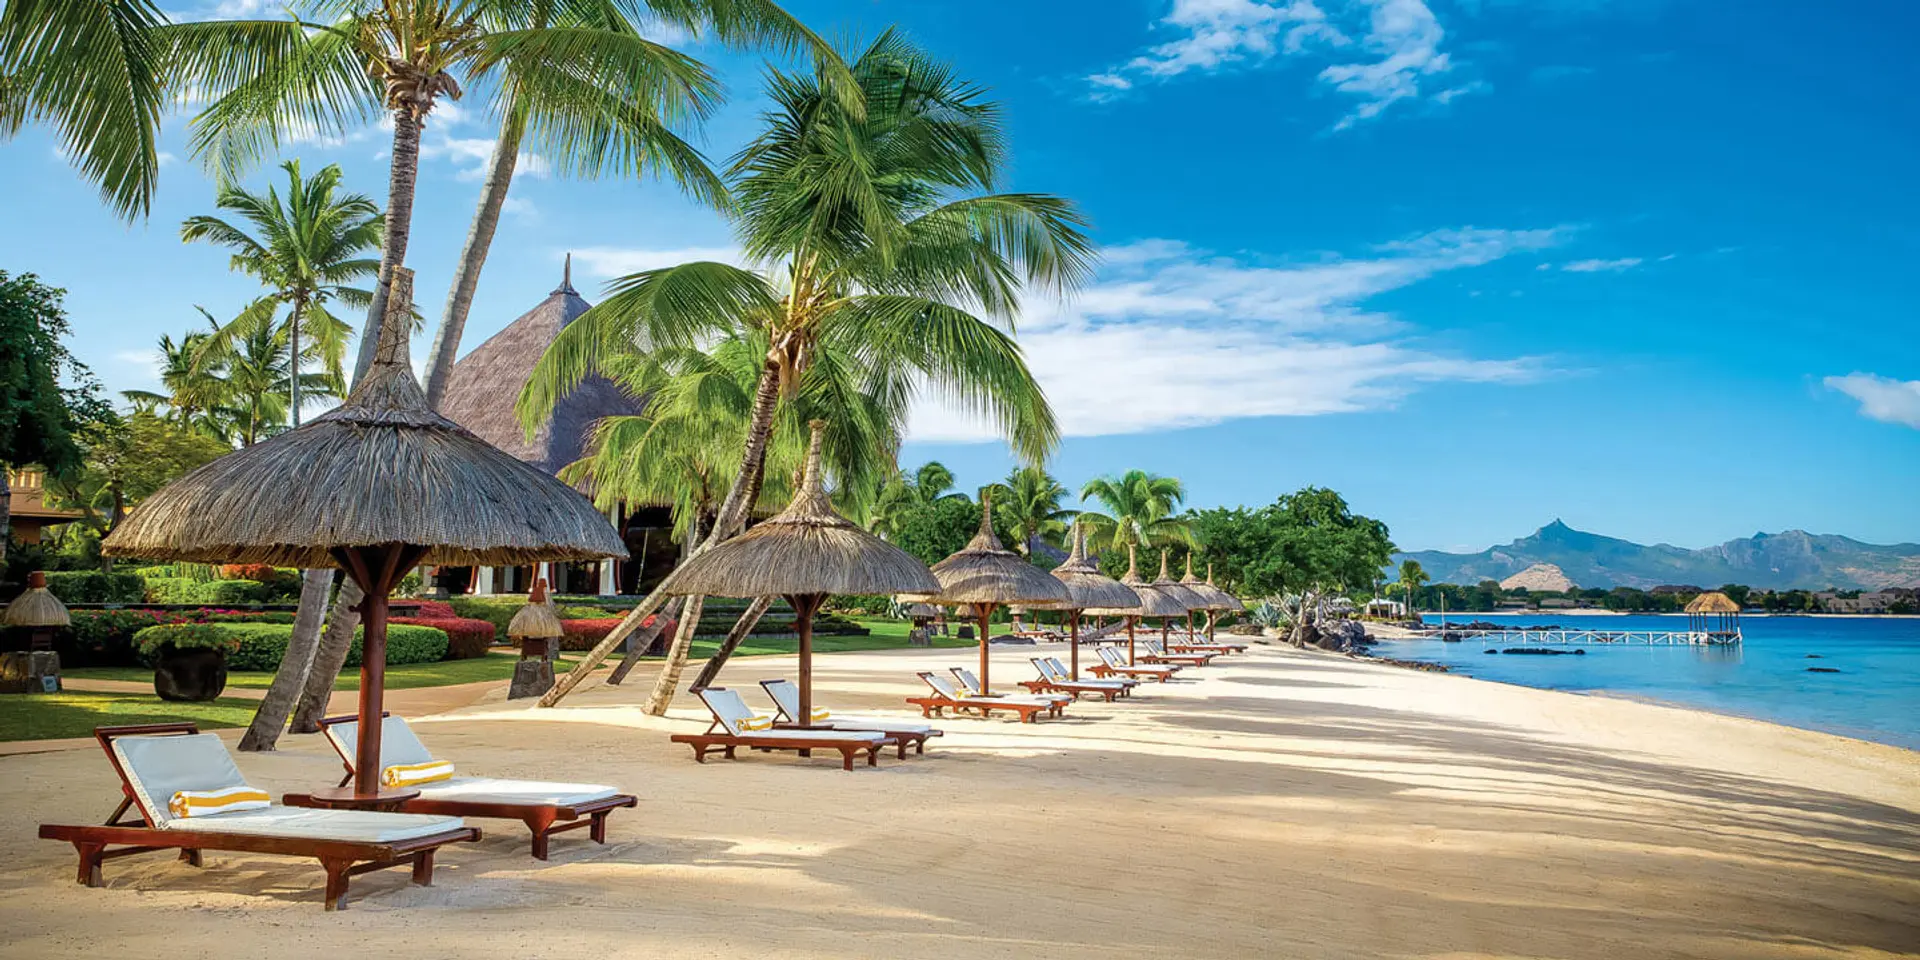 Hotel review Location' - The Oberoi Mauritius - 1